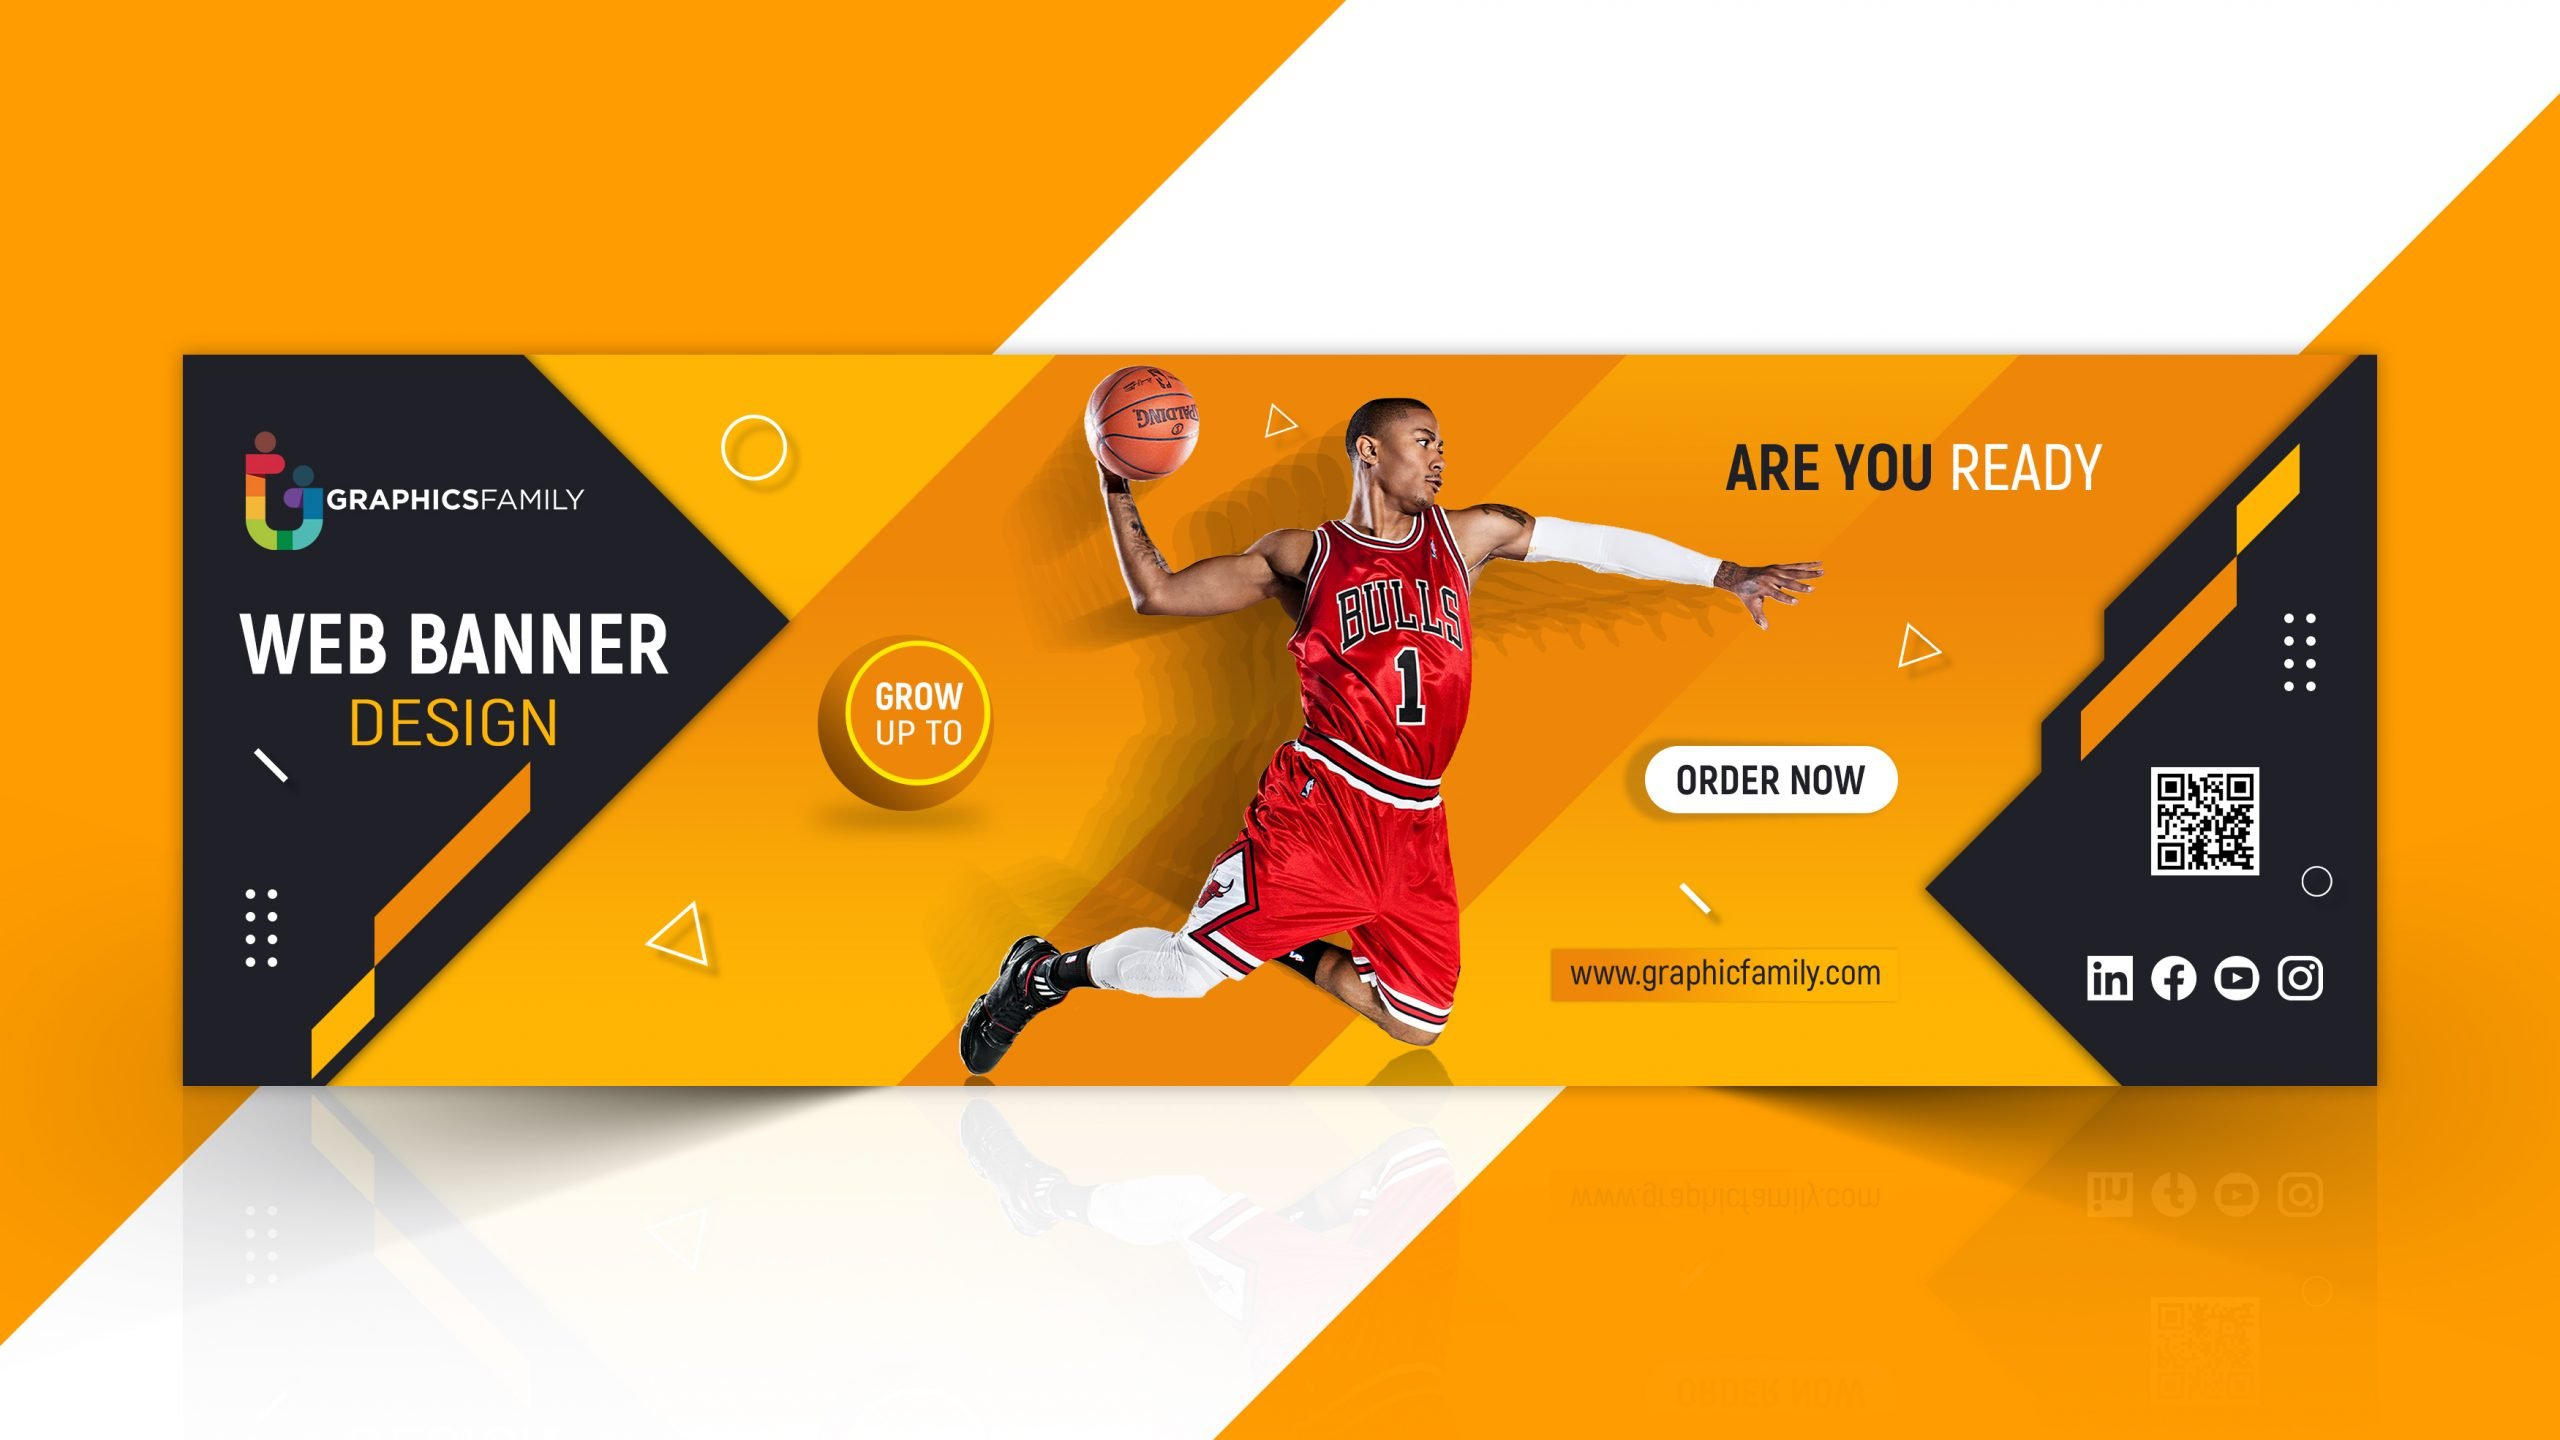 Web banner template with sports concept – GraphicsFamily For Sports Banner Templates